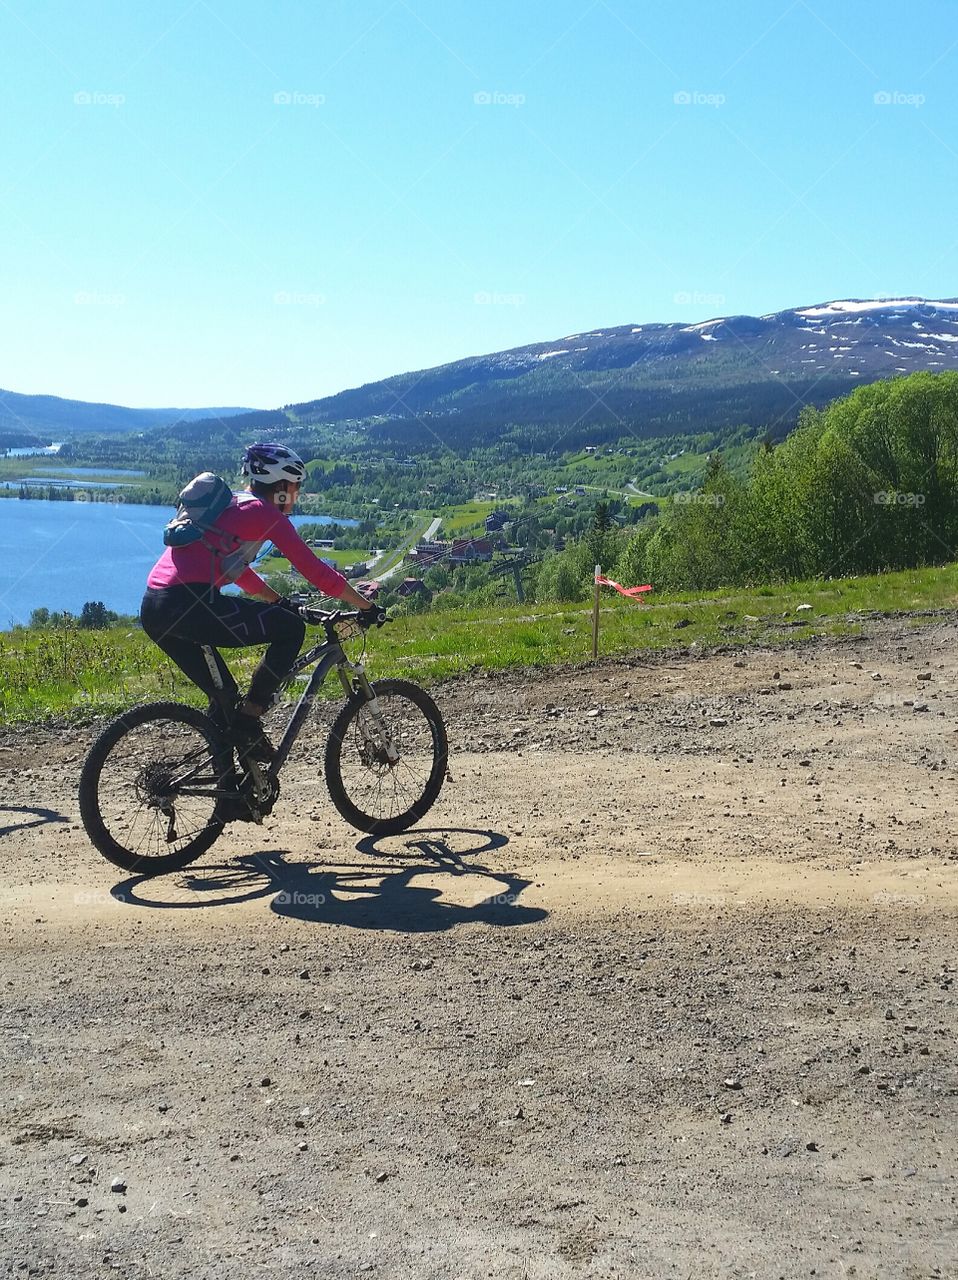 Mountain Cycling!. The photo was taken during the competition of Åre Extreme Challenge in Åre, Sweden.